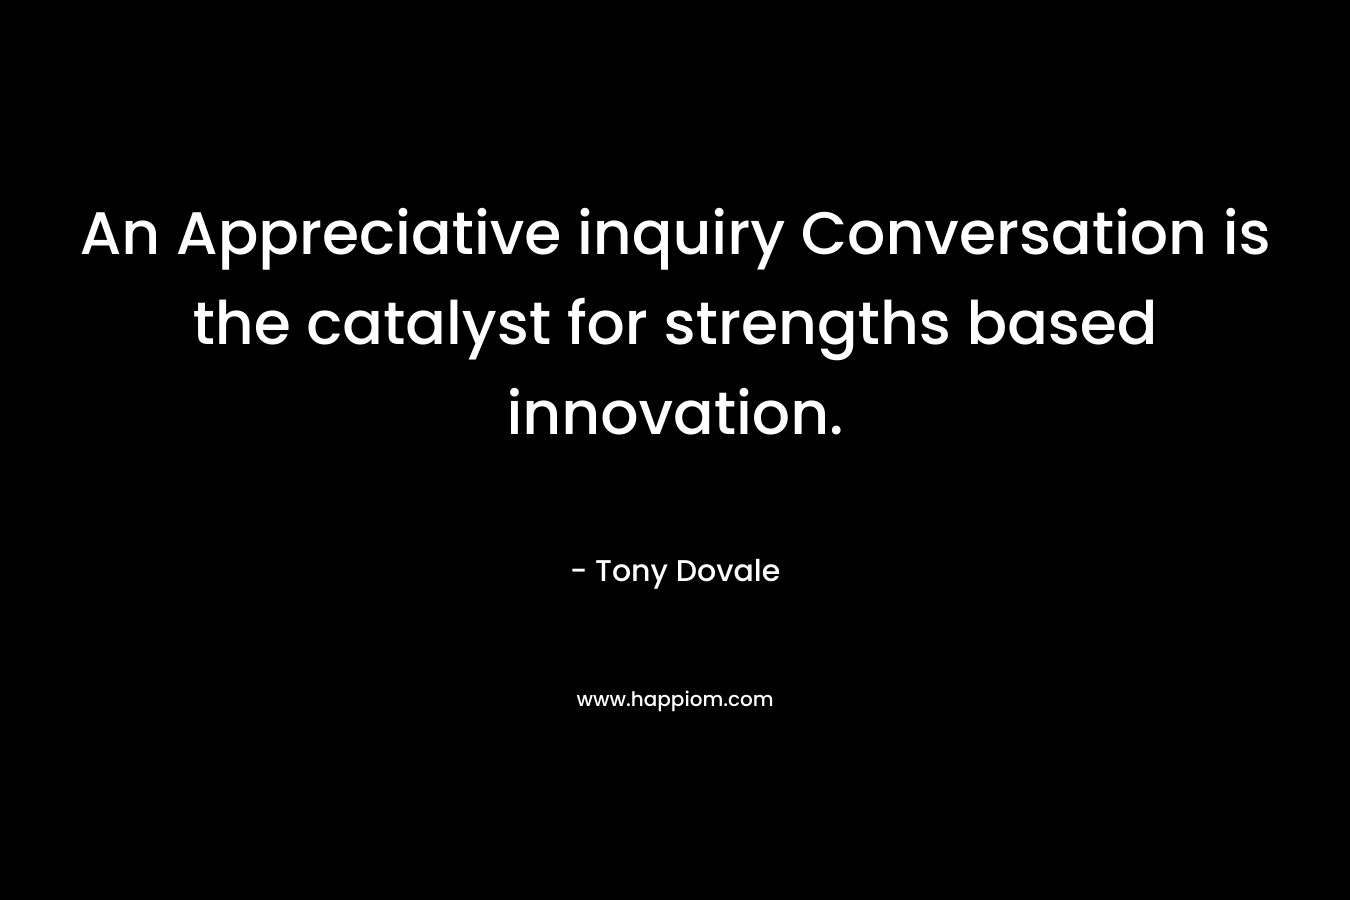 An Appreciative inquiry Conversation is the catalyst for strengths based innovation.